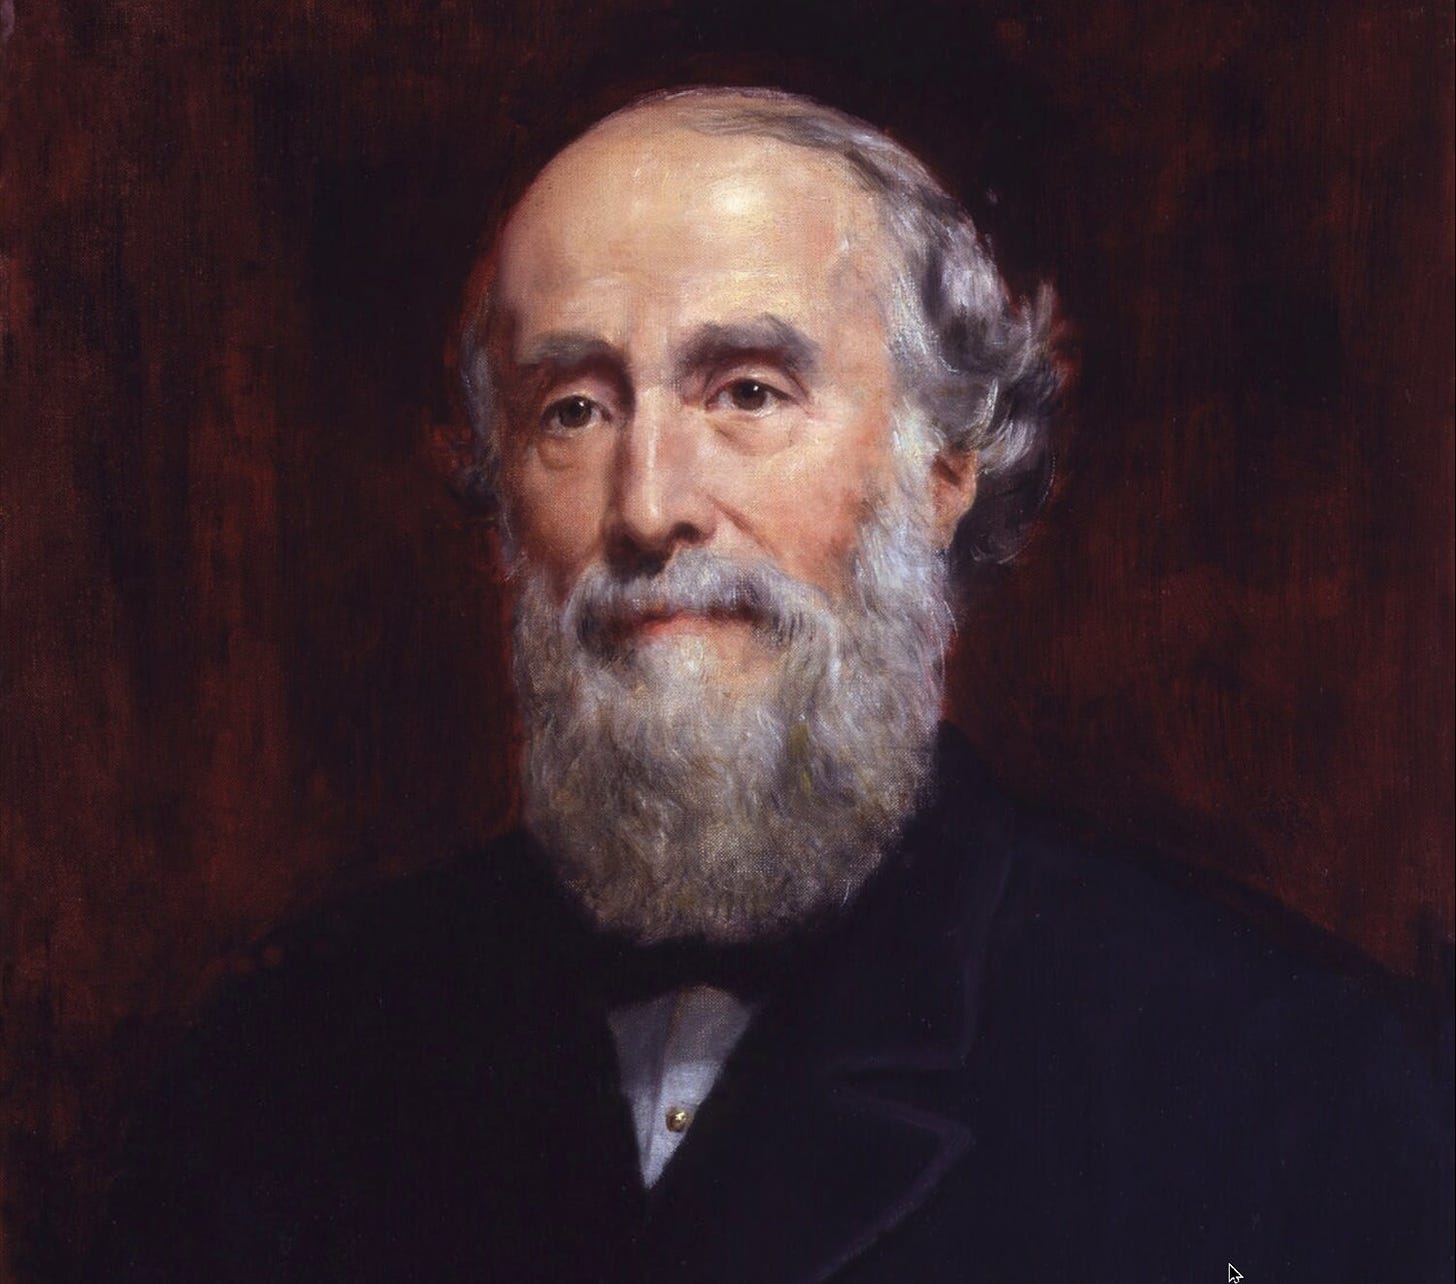 George Williams (1821-1905), founder of the YMCA – by John Collier. National Portrait Gallery | ccby4